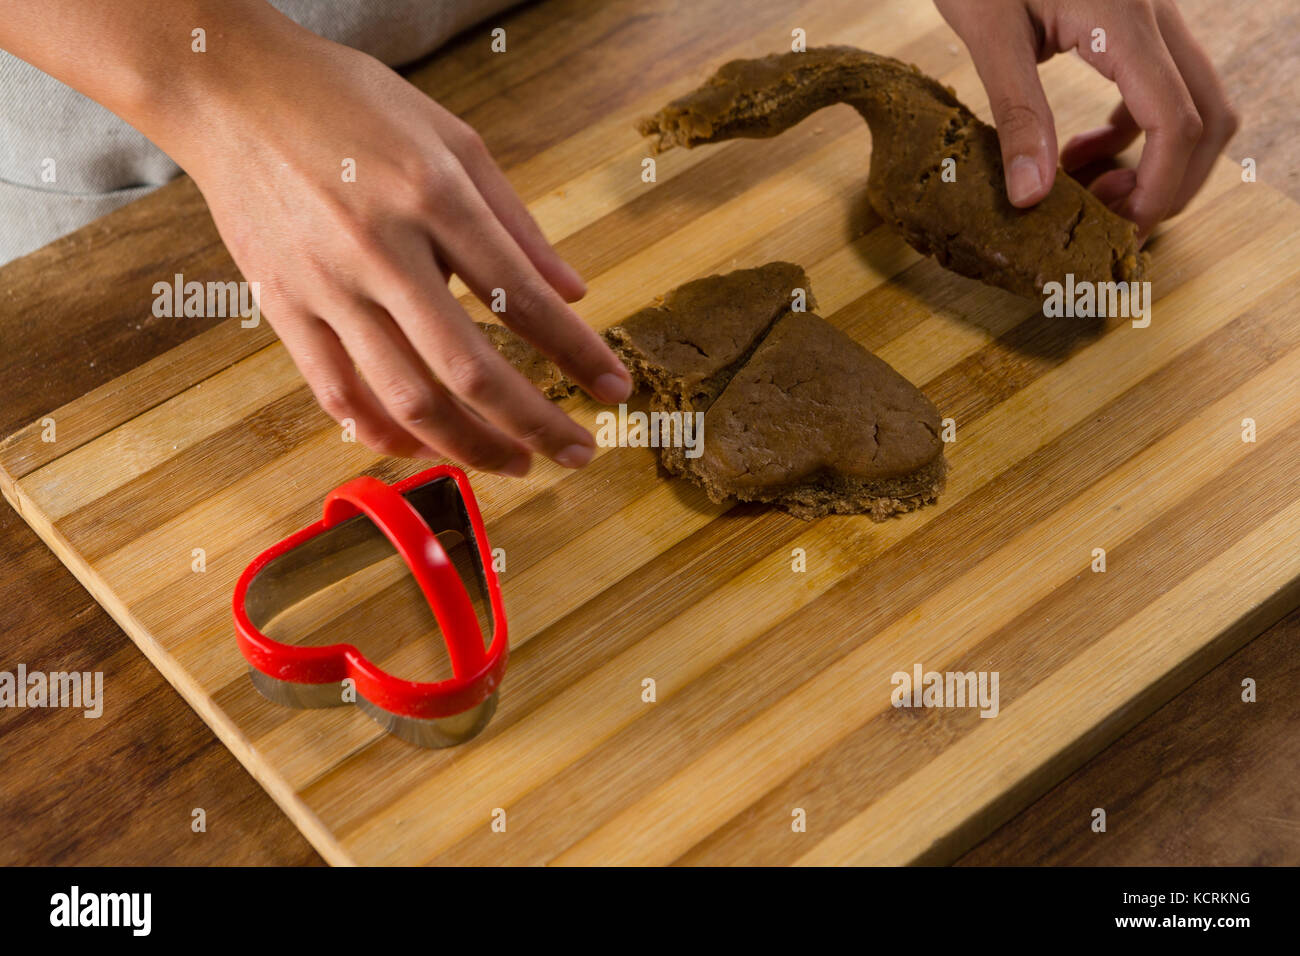 Mid-section of man molding gingerbread dough on wooden board Stock Photo